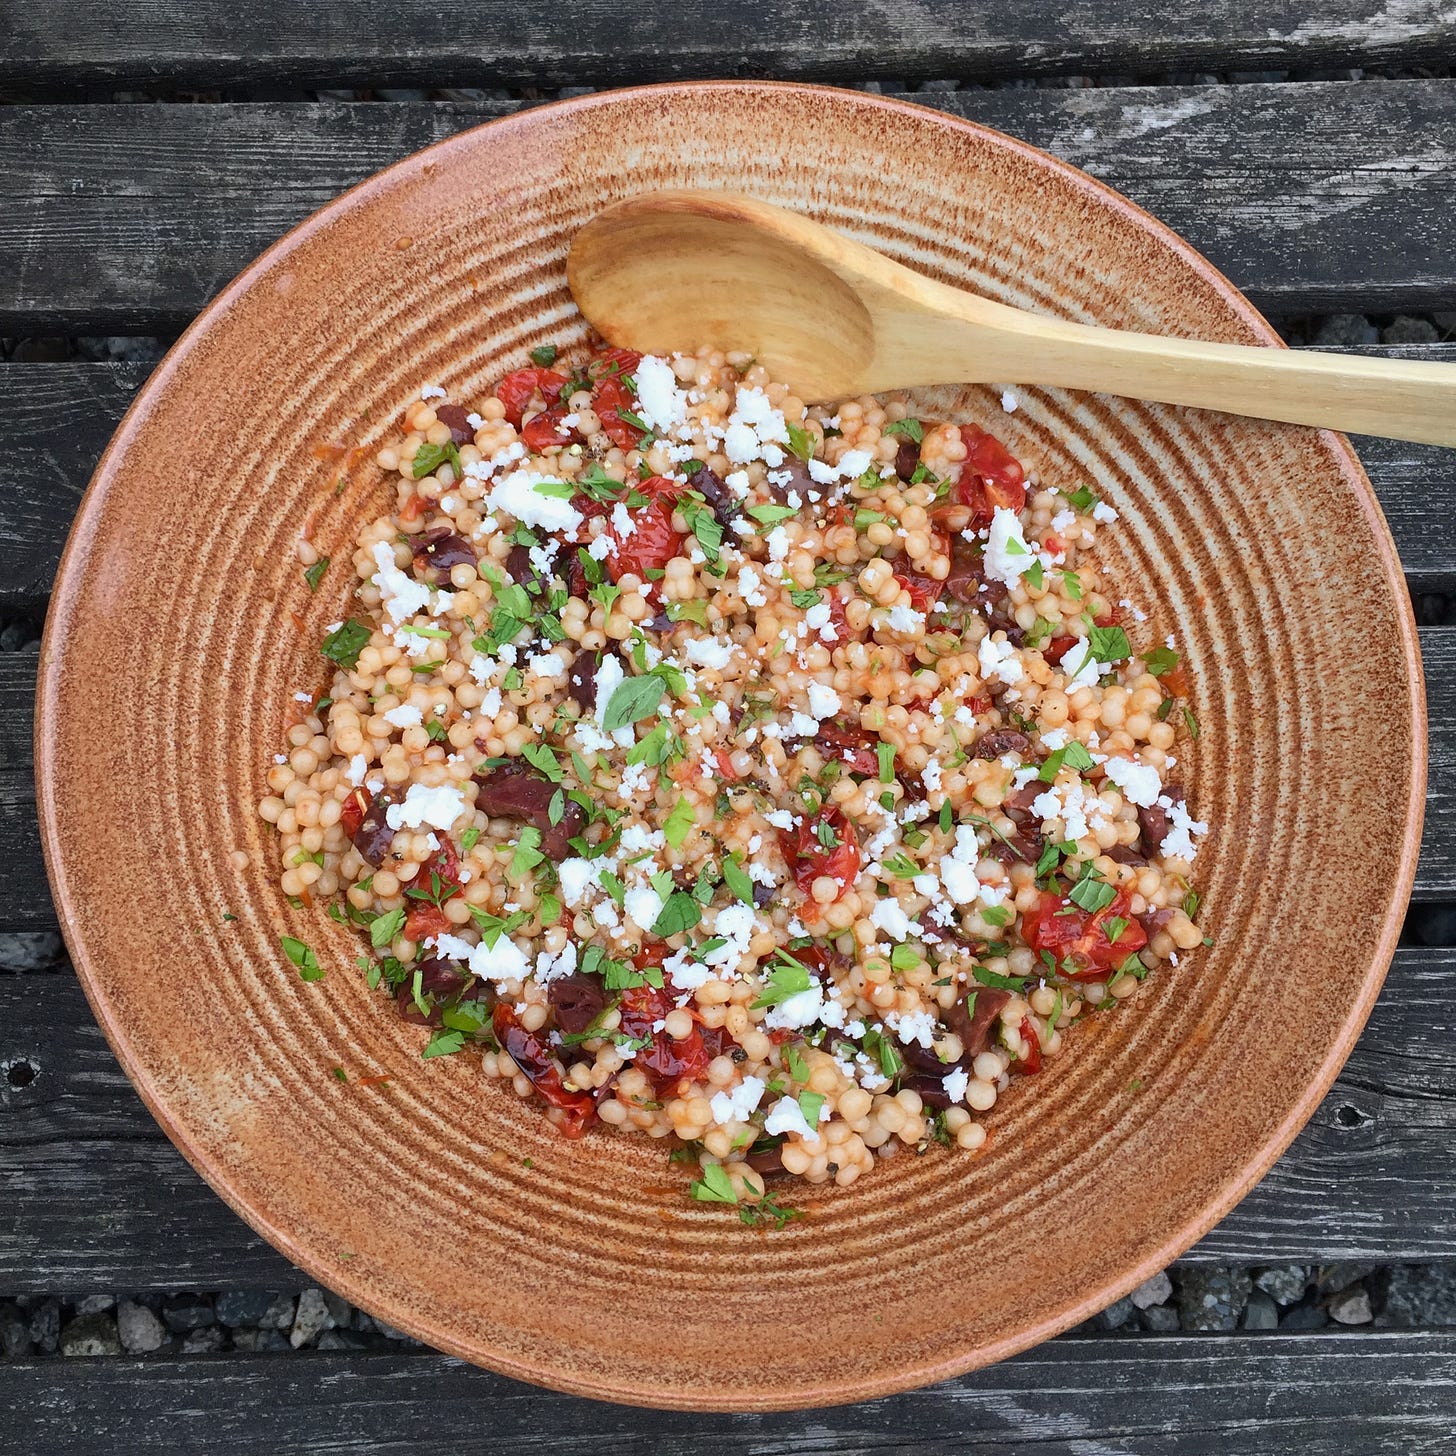 A large stoneware bowl of pearl cousous tossed with kalamata olives, pieces of grape tomato, and herbs. Crumbles of feta and more herbs are sprinkled over the top, and a wooden spoon rests at the top edge of the bowl.